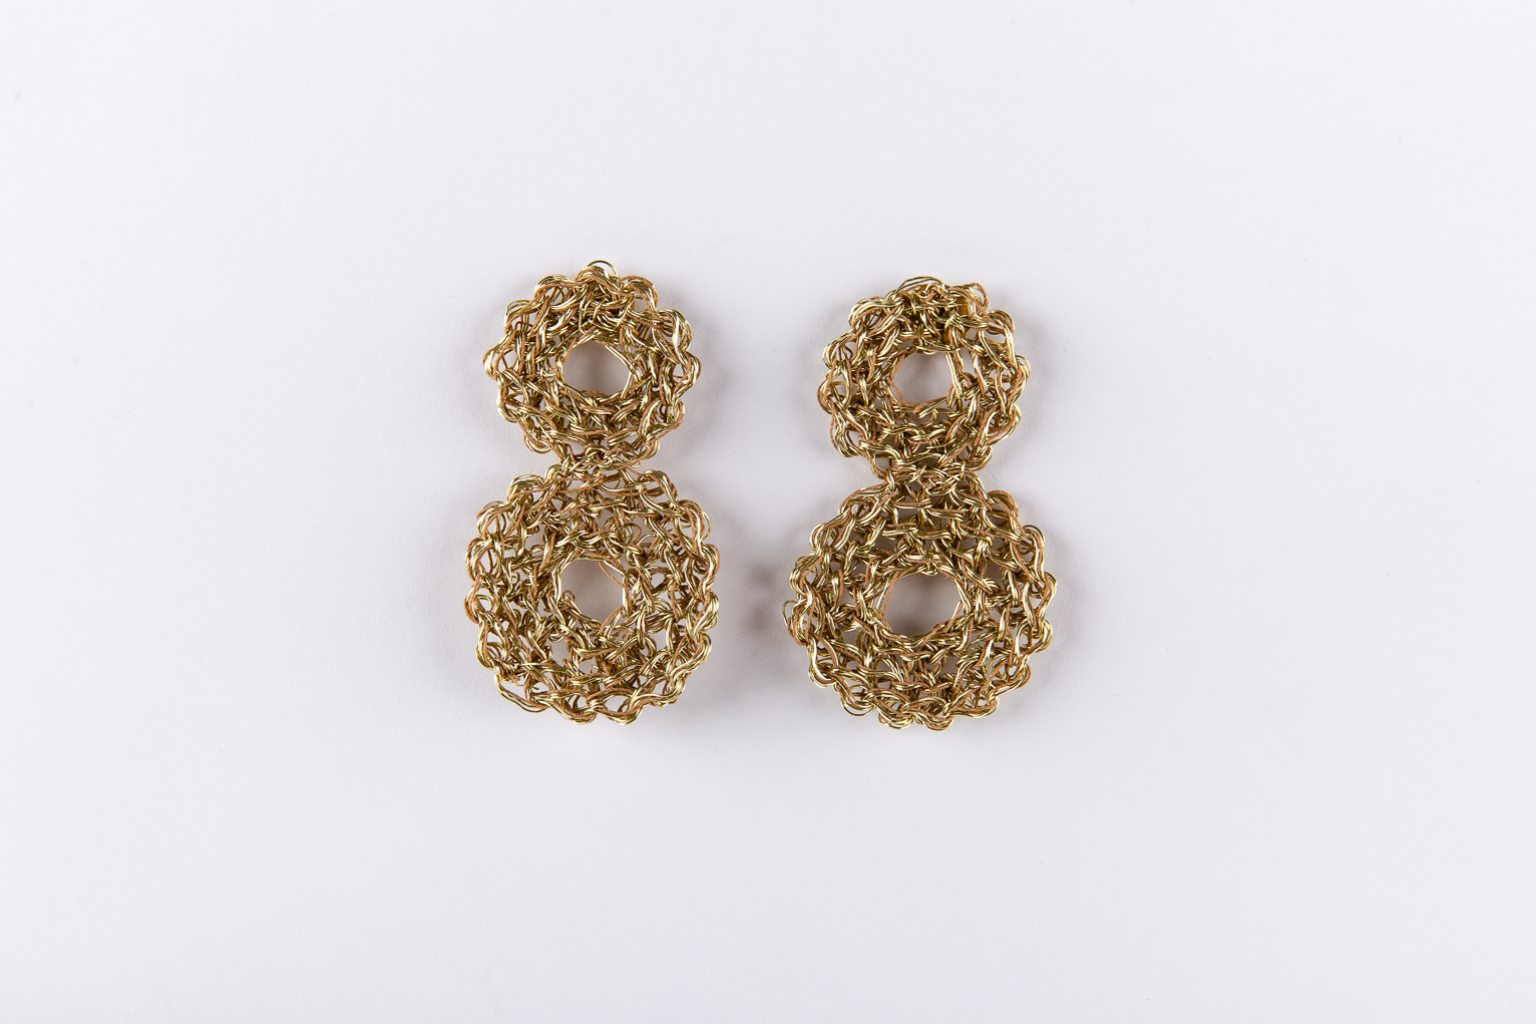 Handknitted gold-plated earrings